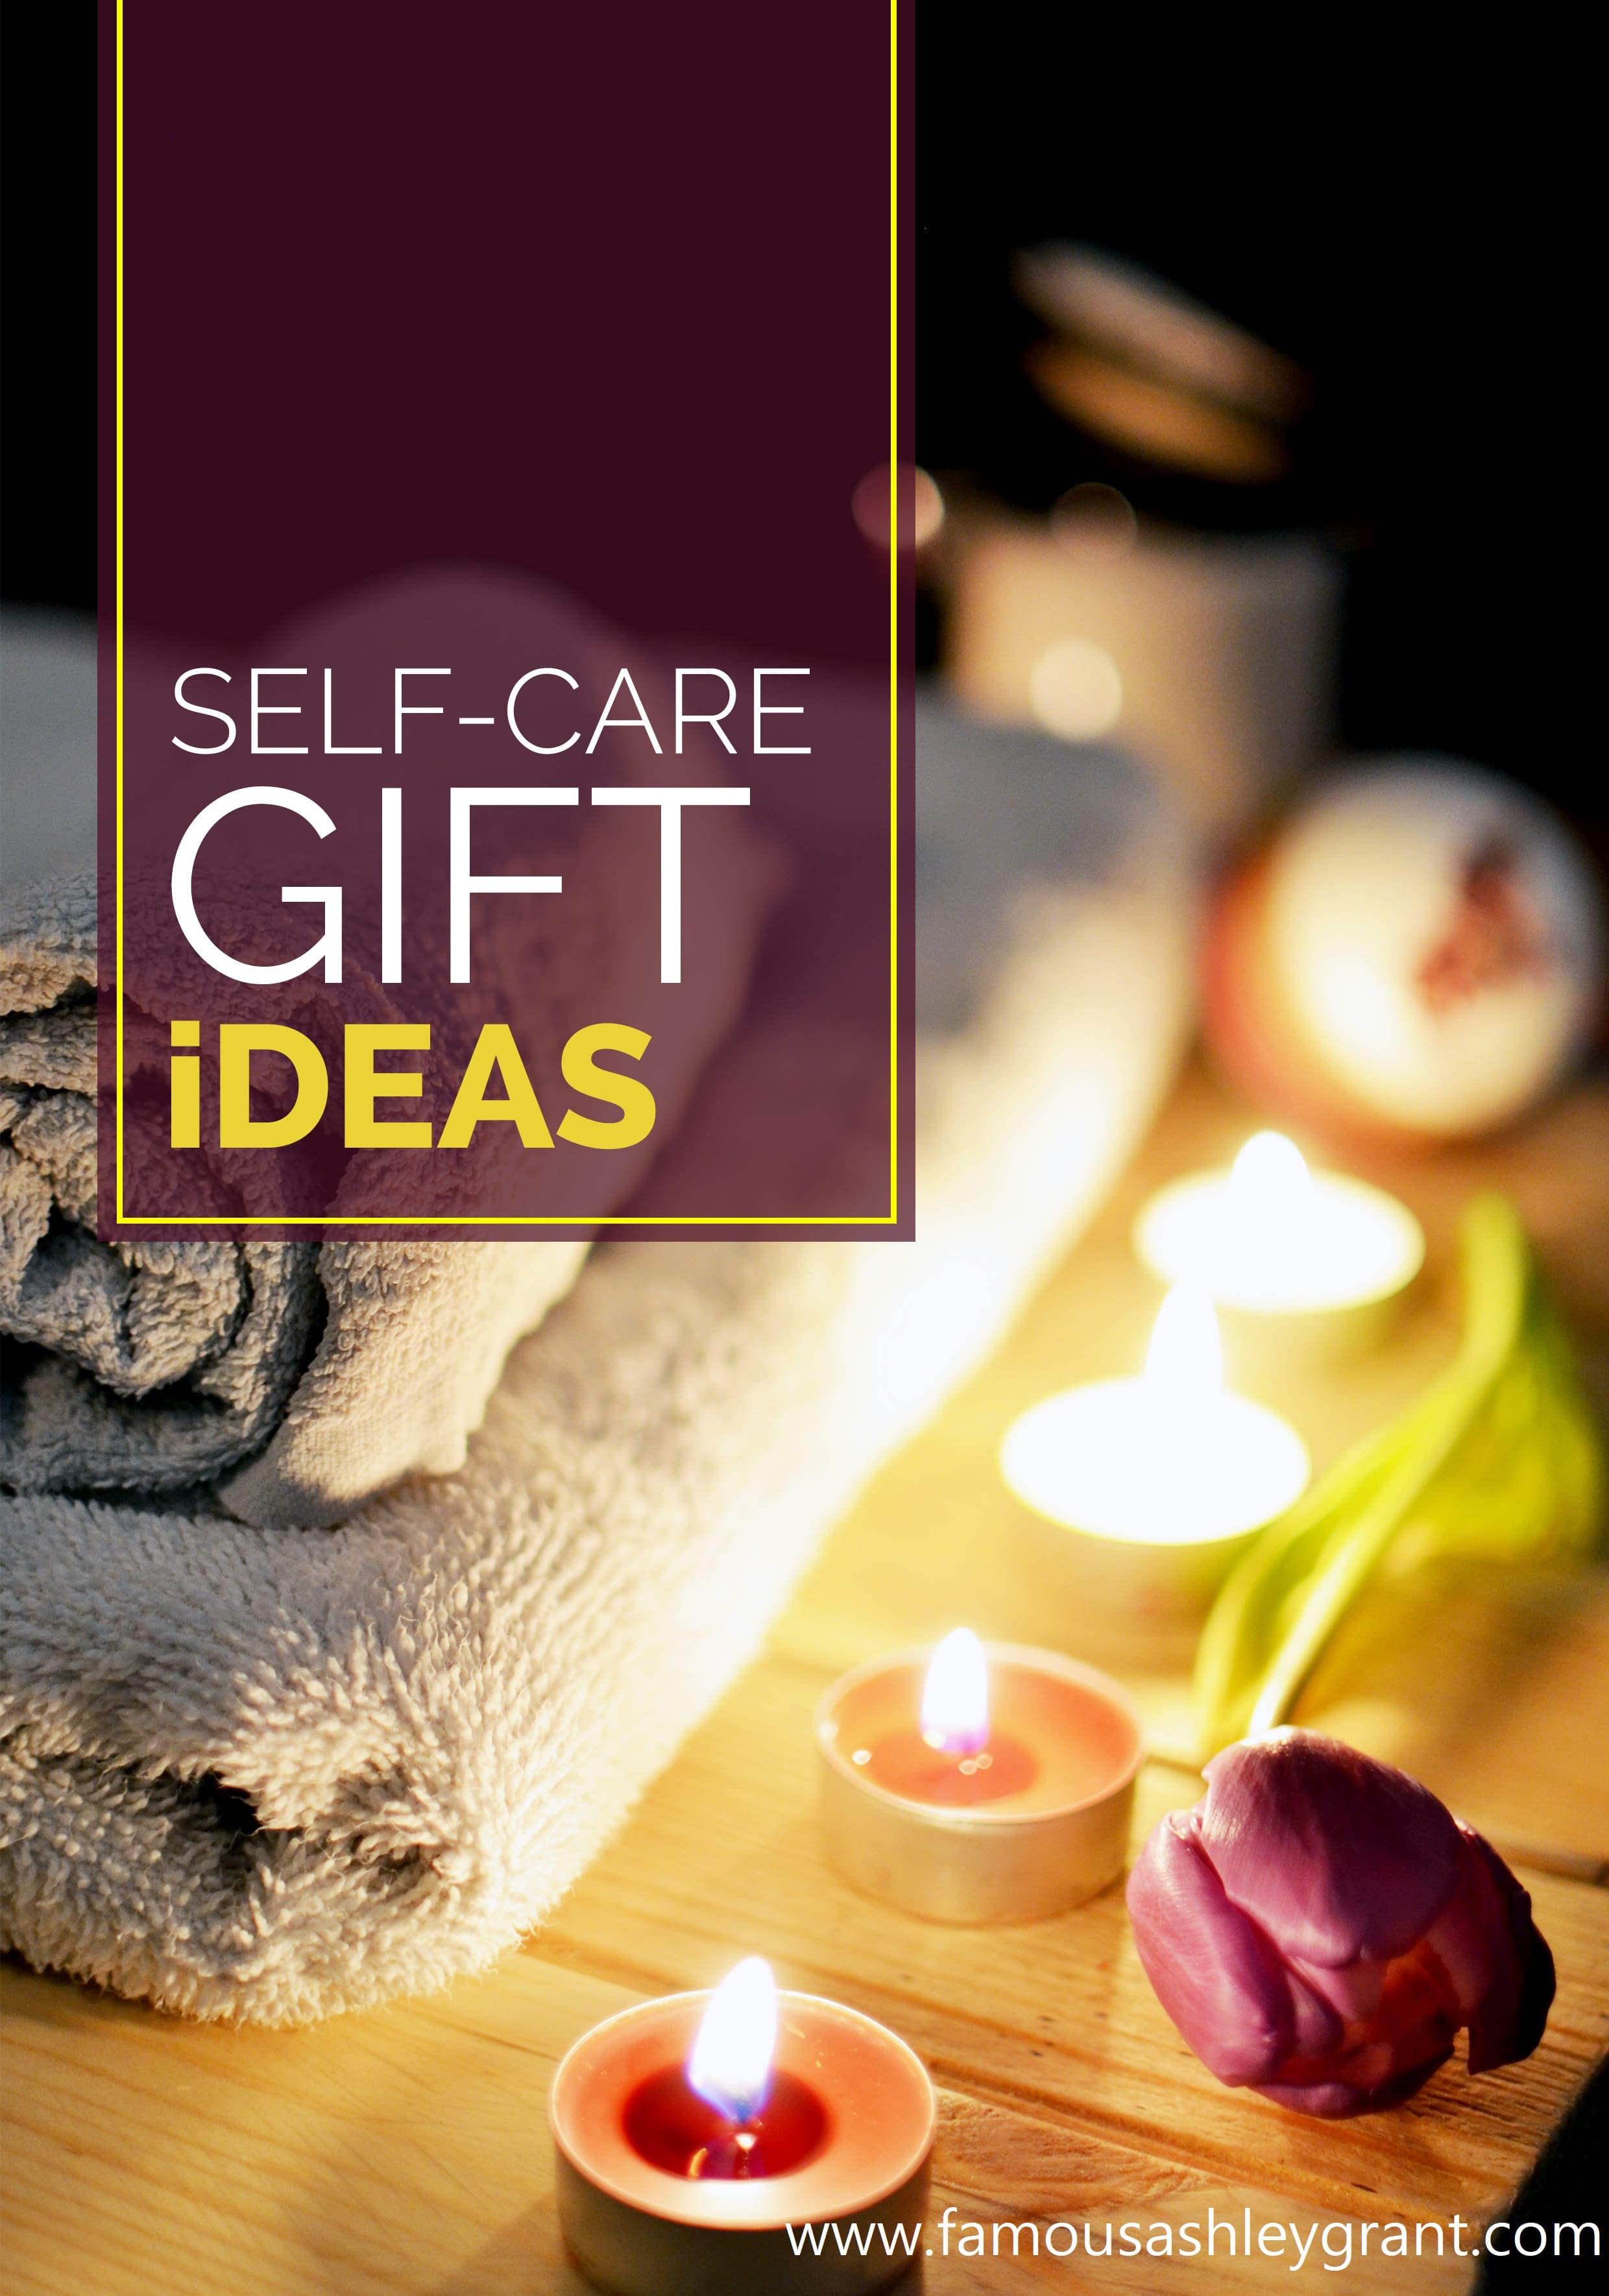 Looking for a gift for someone who needs to indulge more in self-care? You've come to the right place! This post is full of self-care gift ideas.